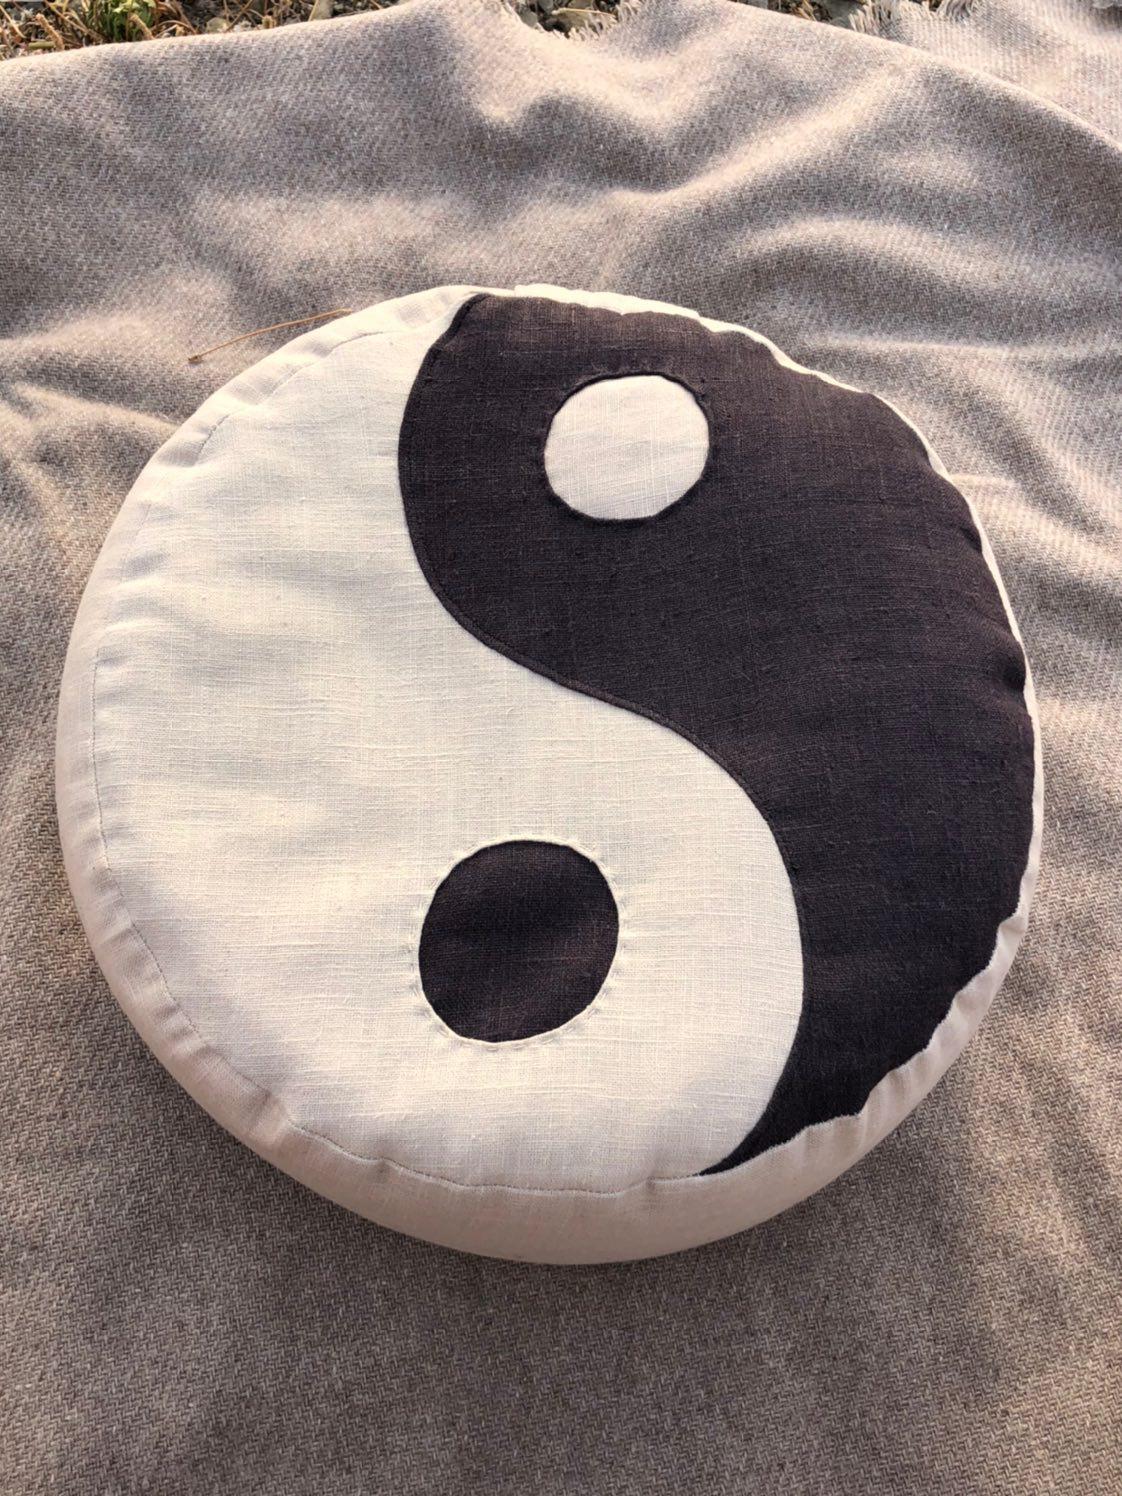 PRIVATE OM YIN YANG PILLOW ODEANDIEFREUDE